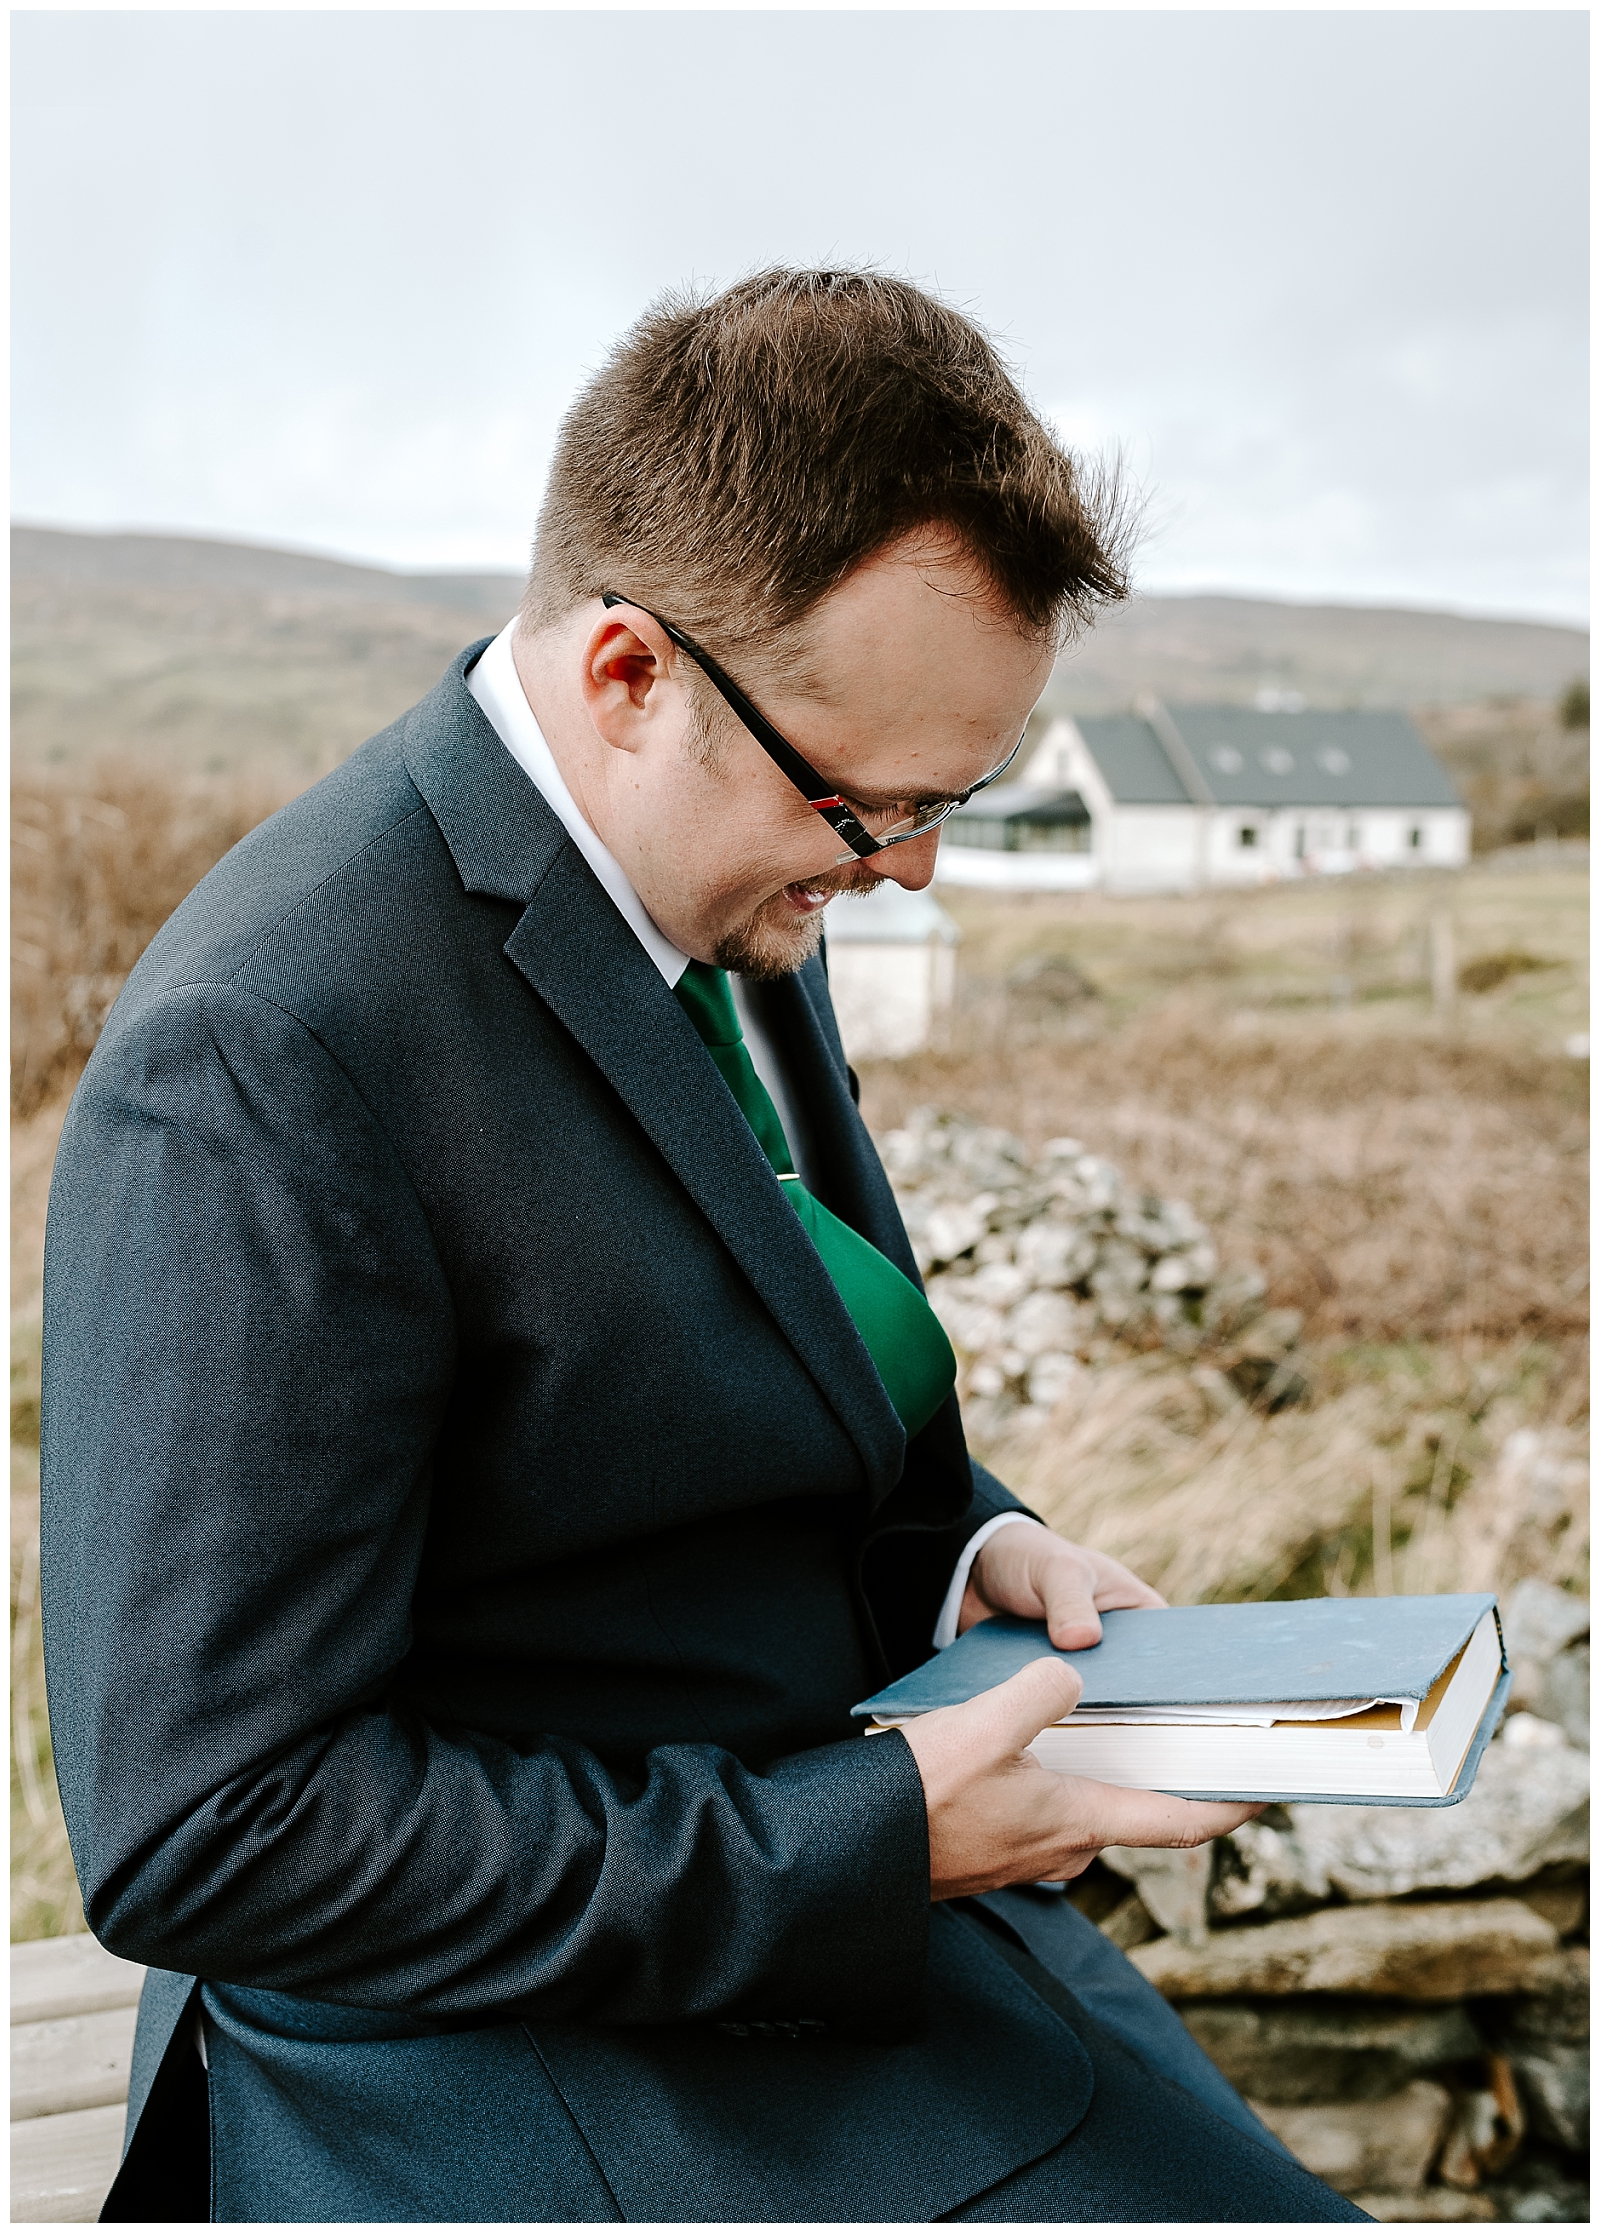 Groom reading a letter from his bride during their Ireland elopement.